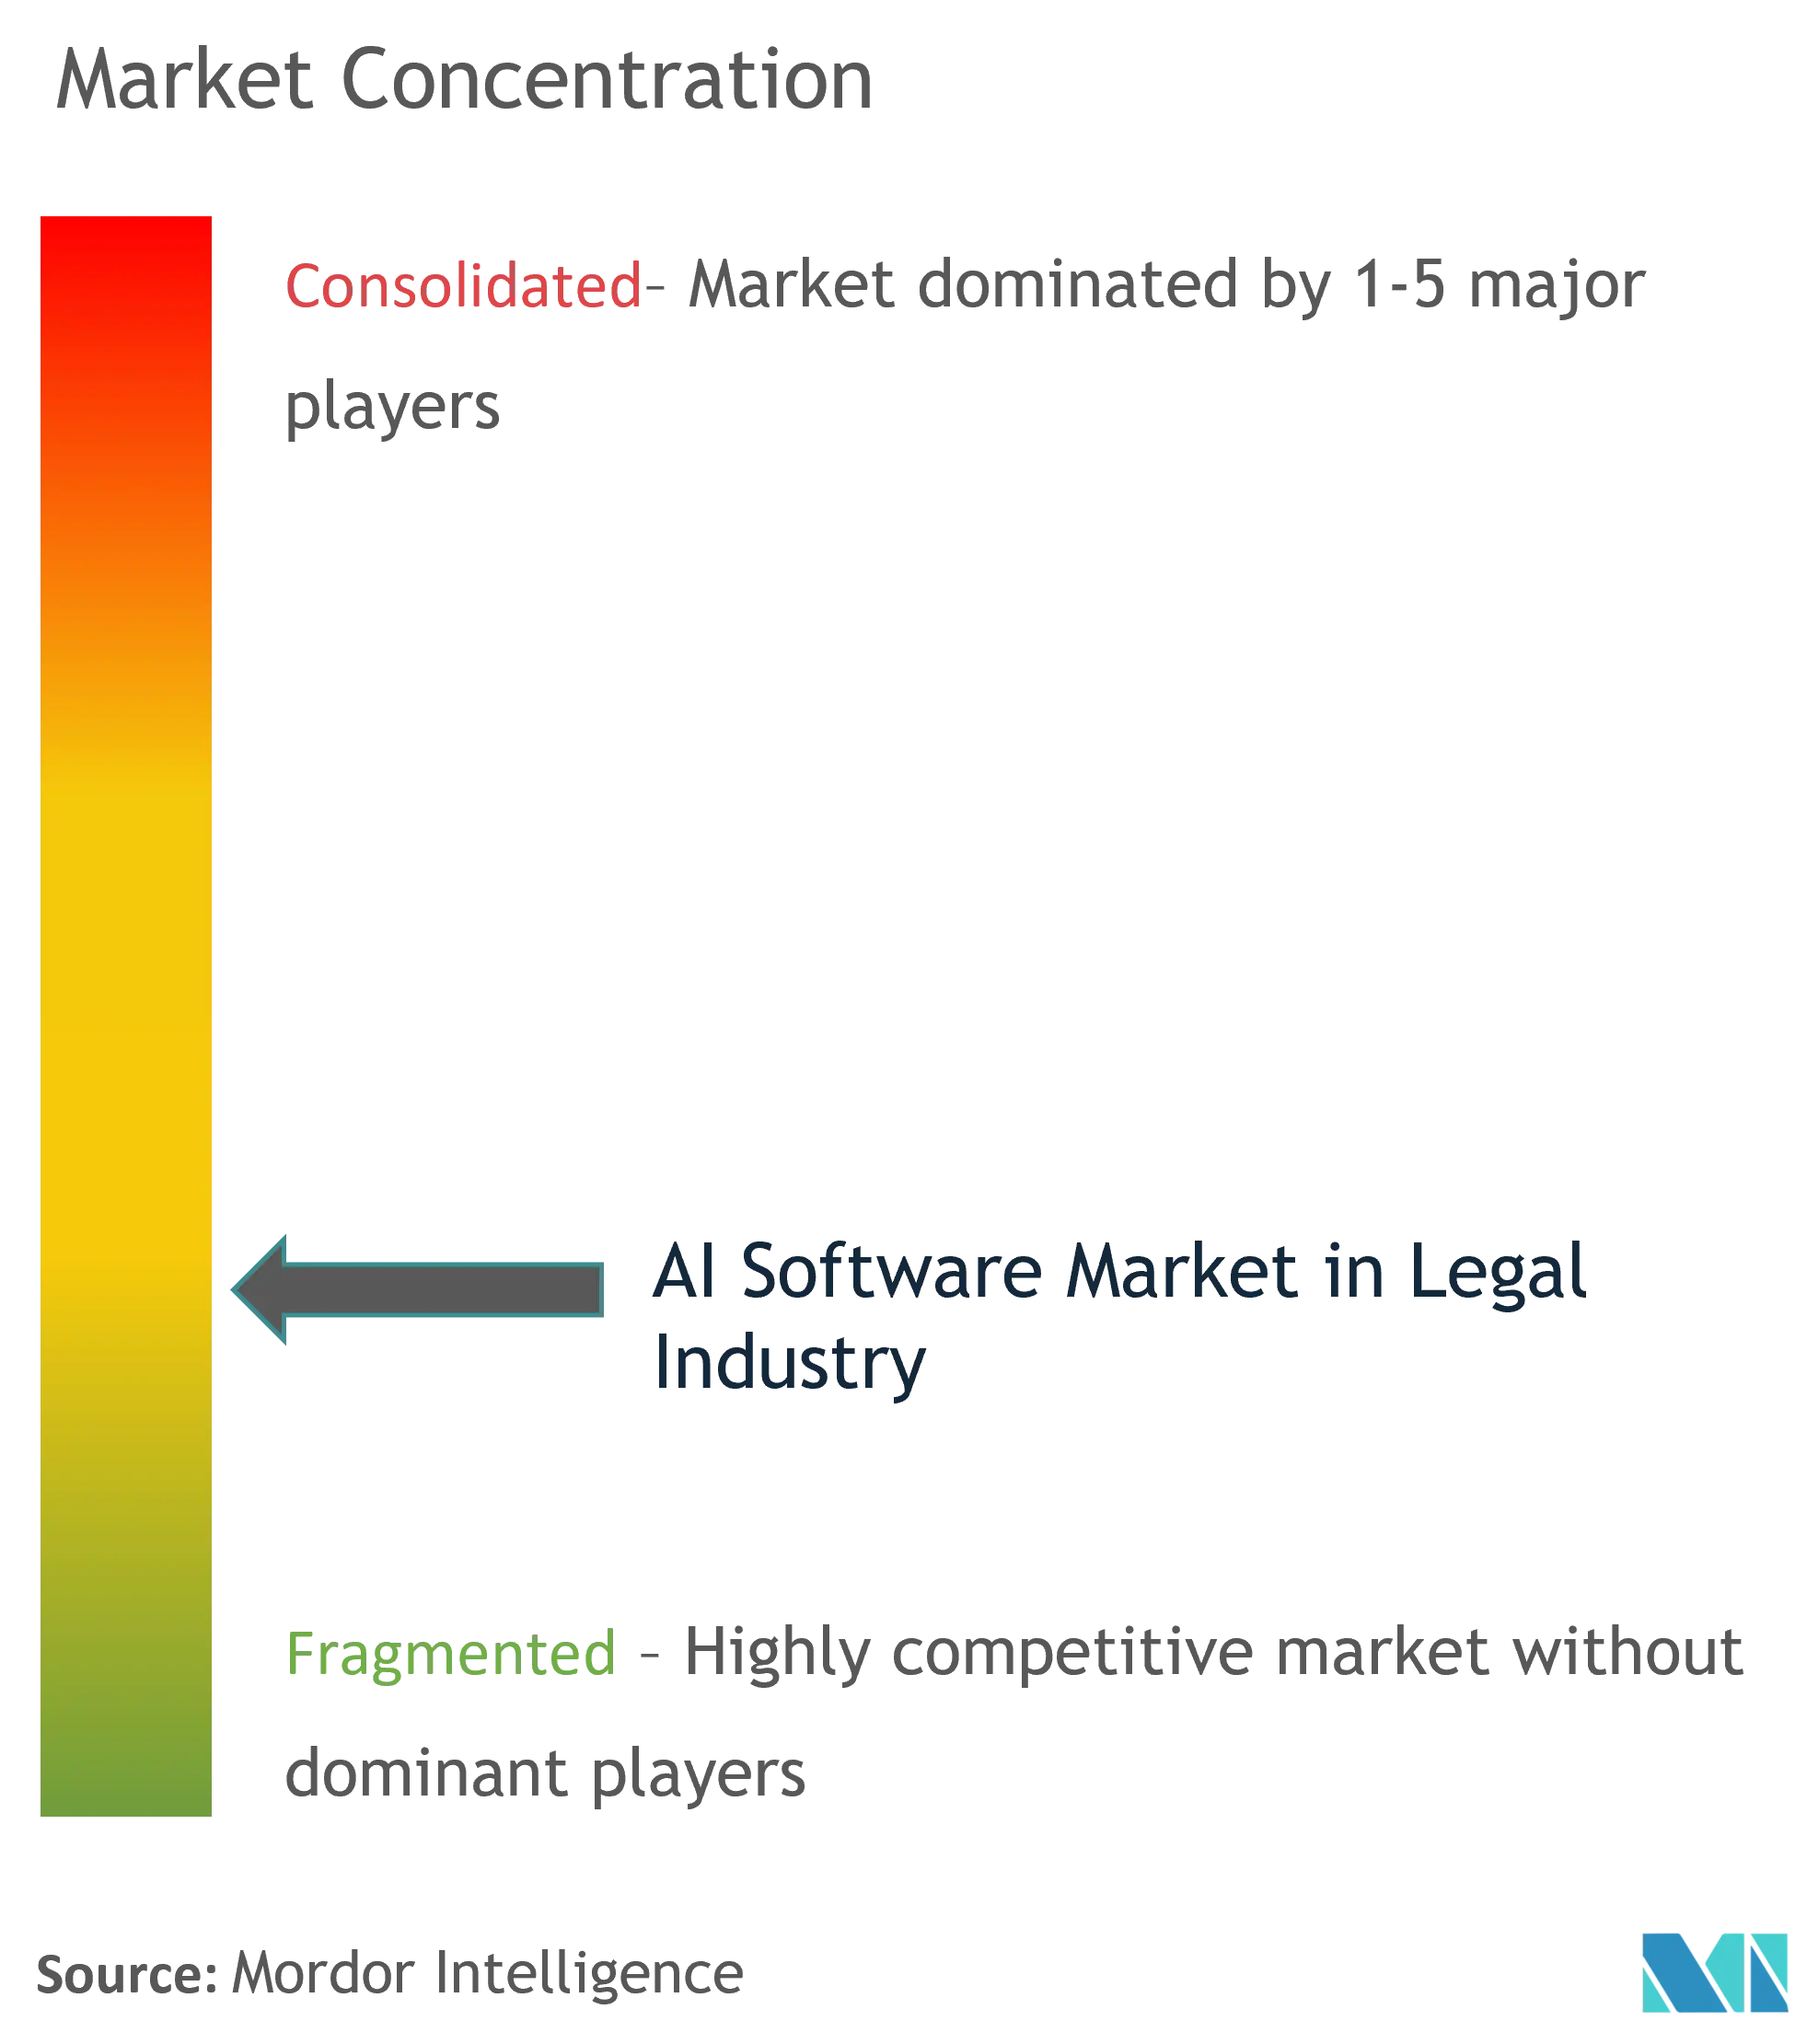 AI Software Market in Legal Industry - Market Concentration.png